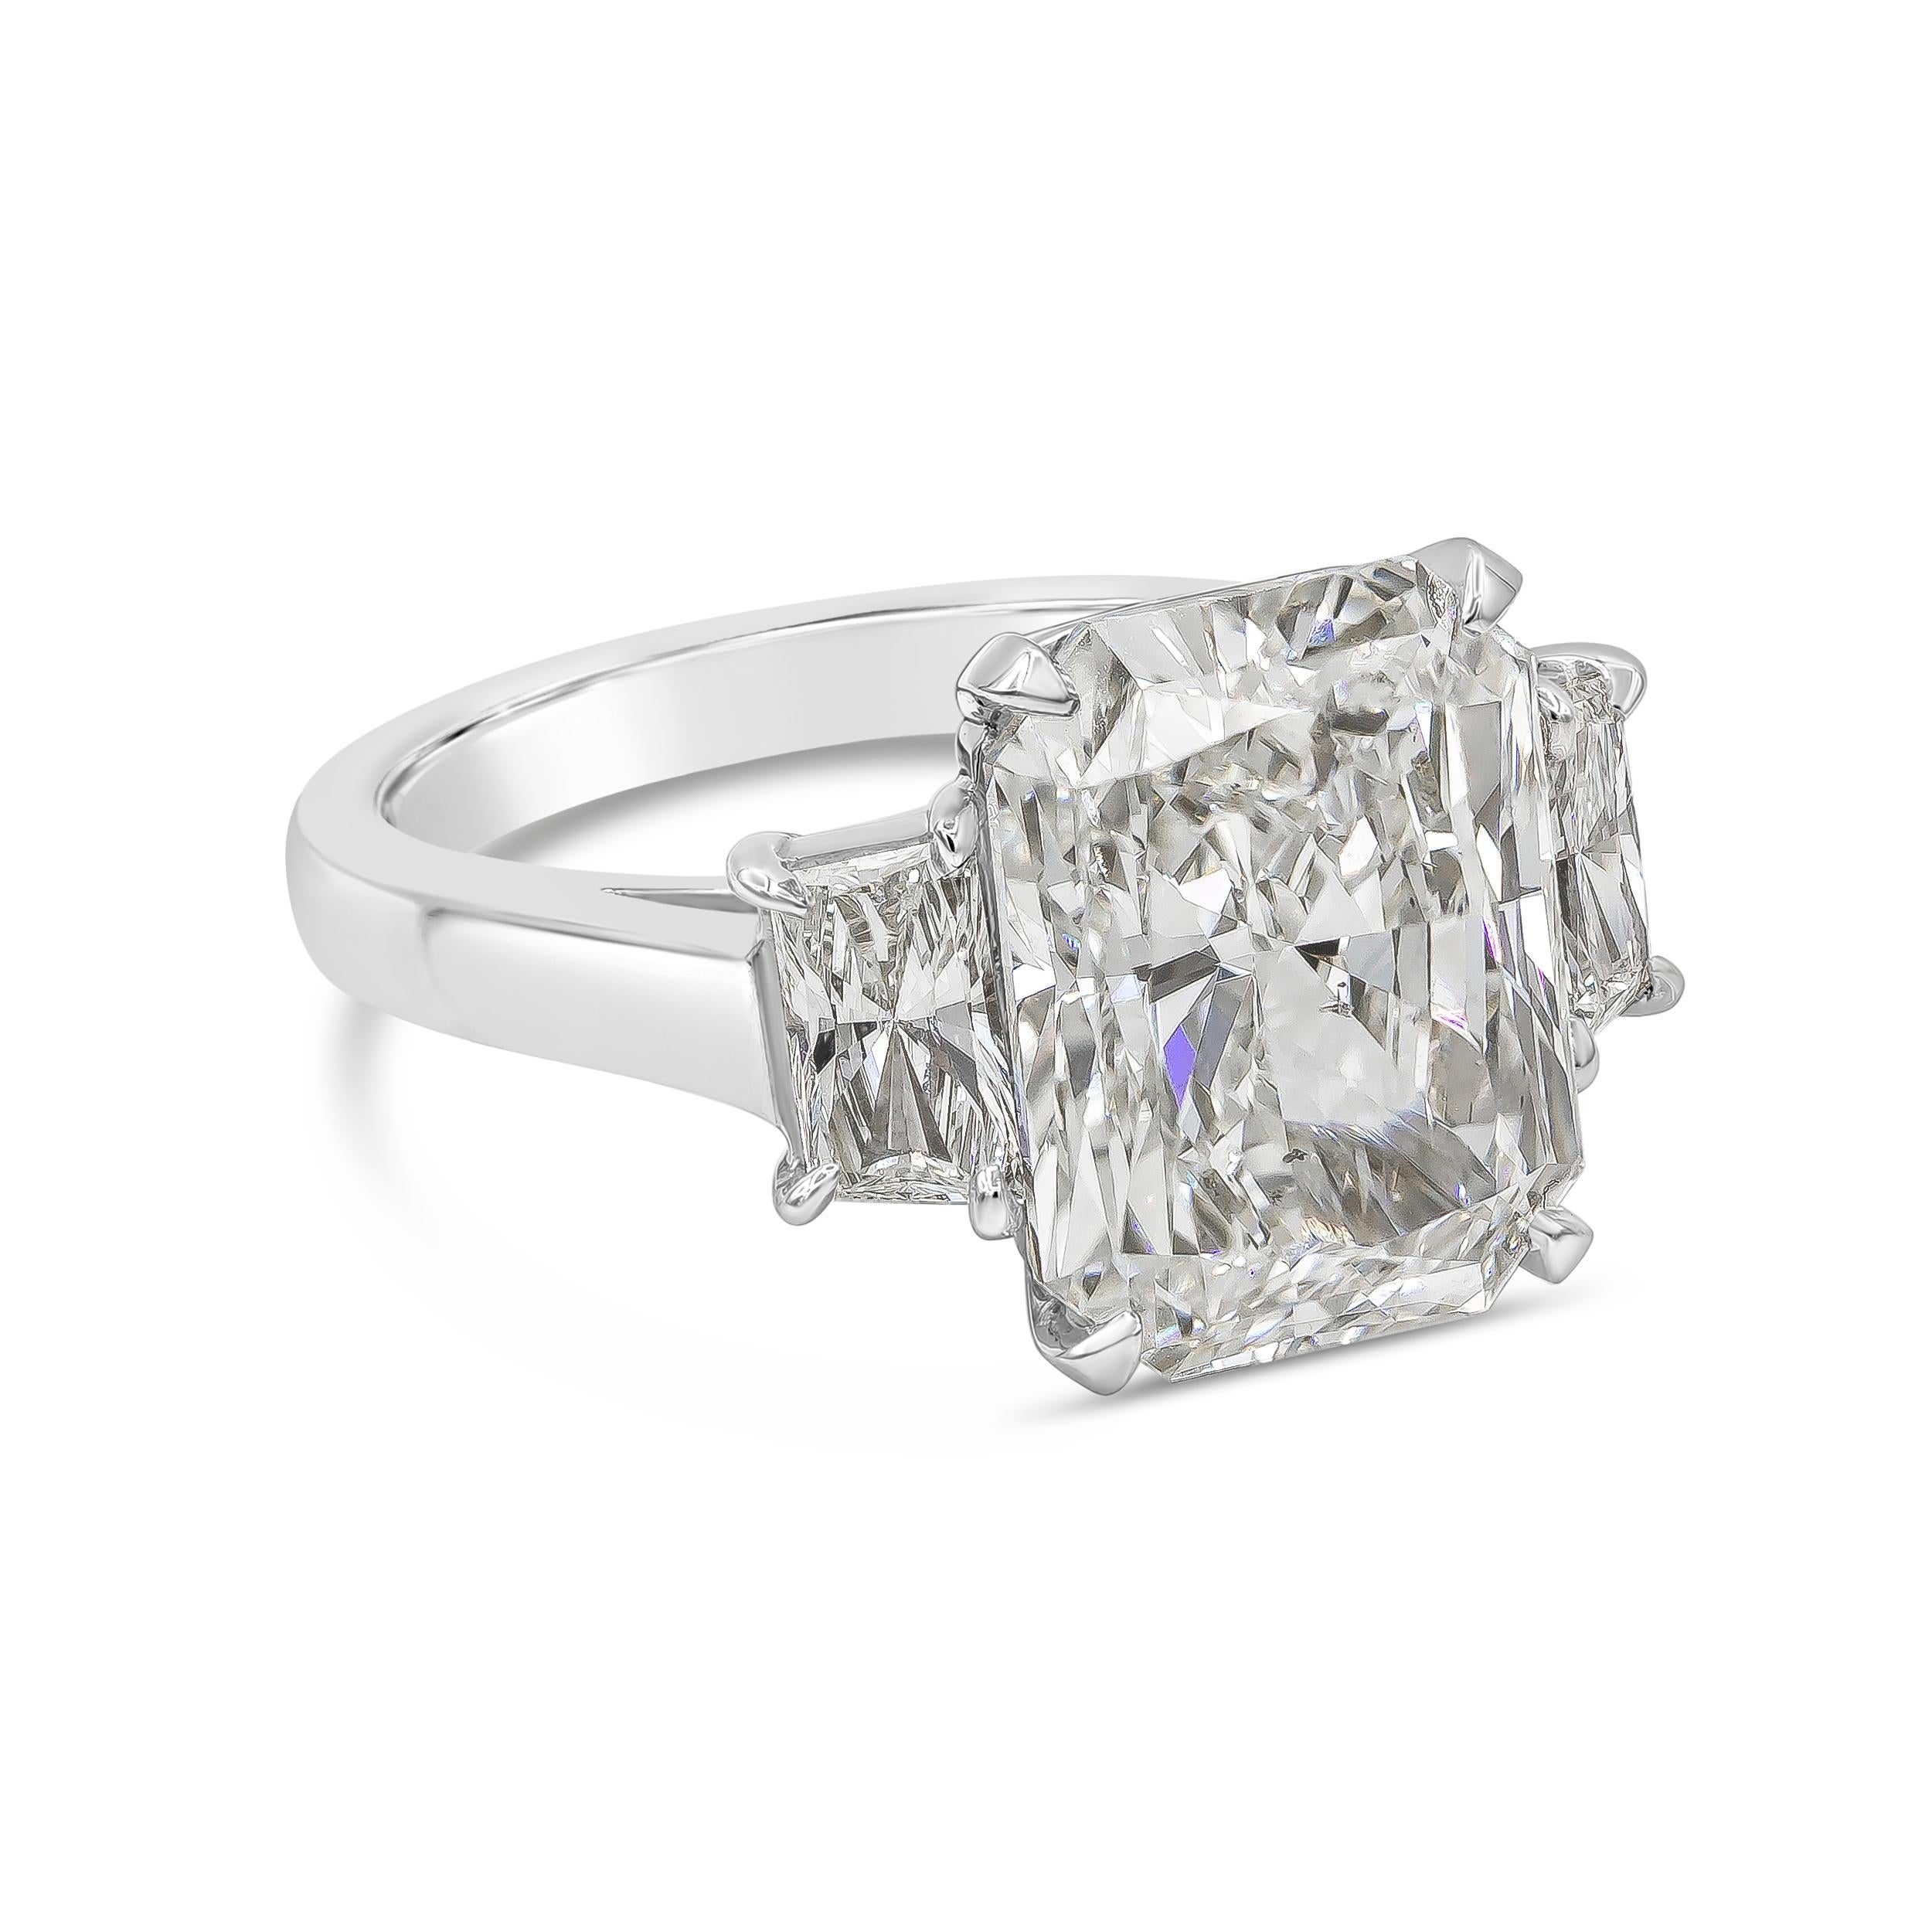 This classy and vibrant three-stone engagement ring showcasing 8.01 carat radiant cut diamond certified by GIA as J color, SI1 clarity, flanked by two trapezoid diamonds weighing 1.05 carats total. Set in a polished Platinum mounting.

